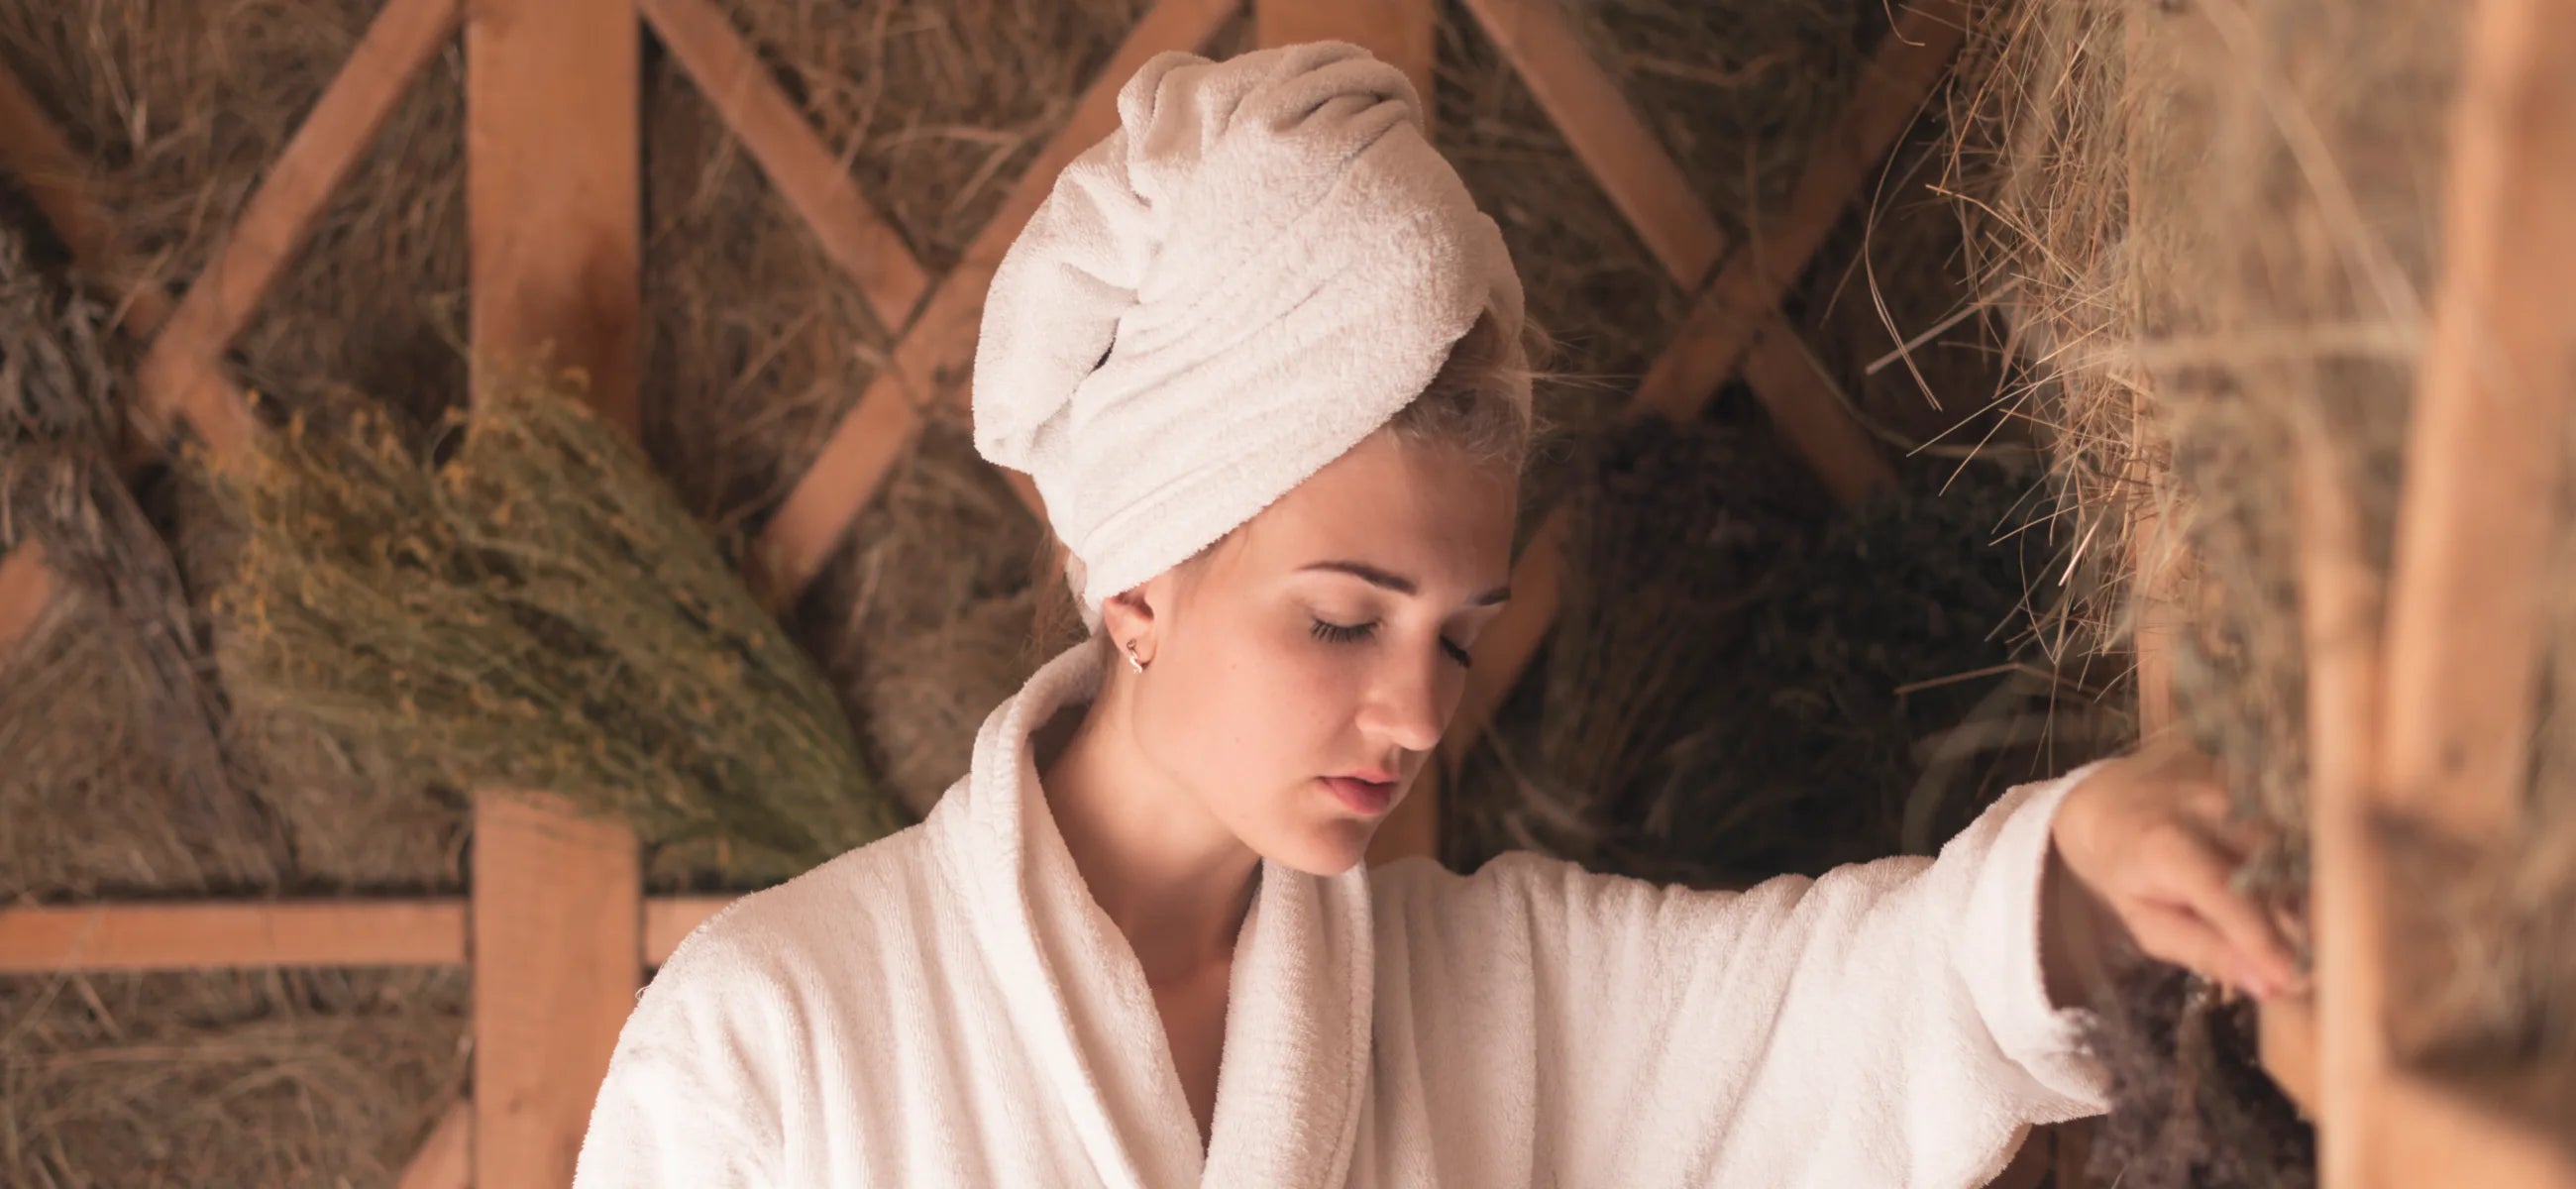 Air drying vs. towel drying: Which hair drying method is better?